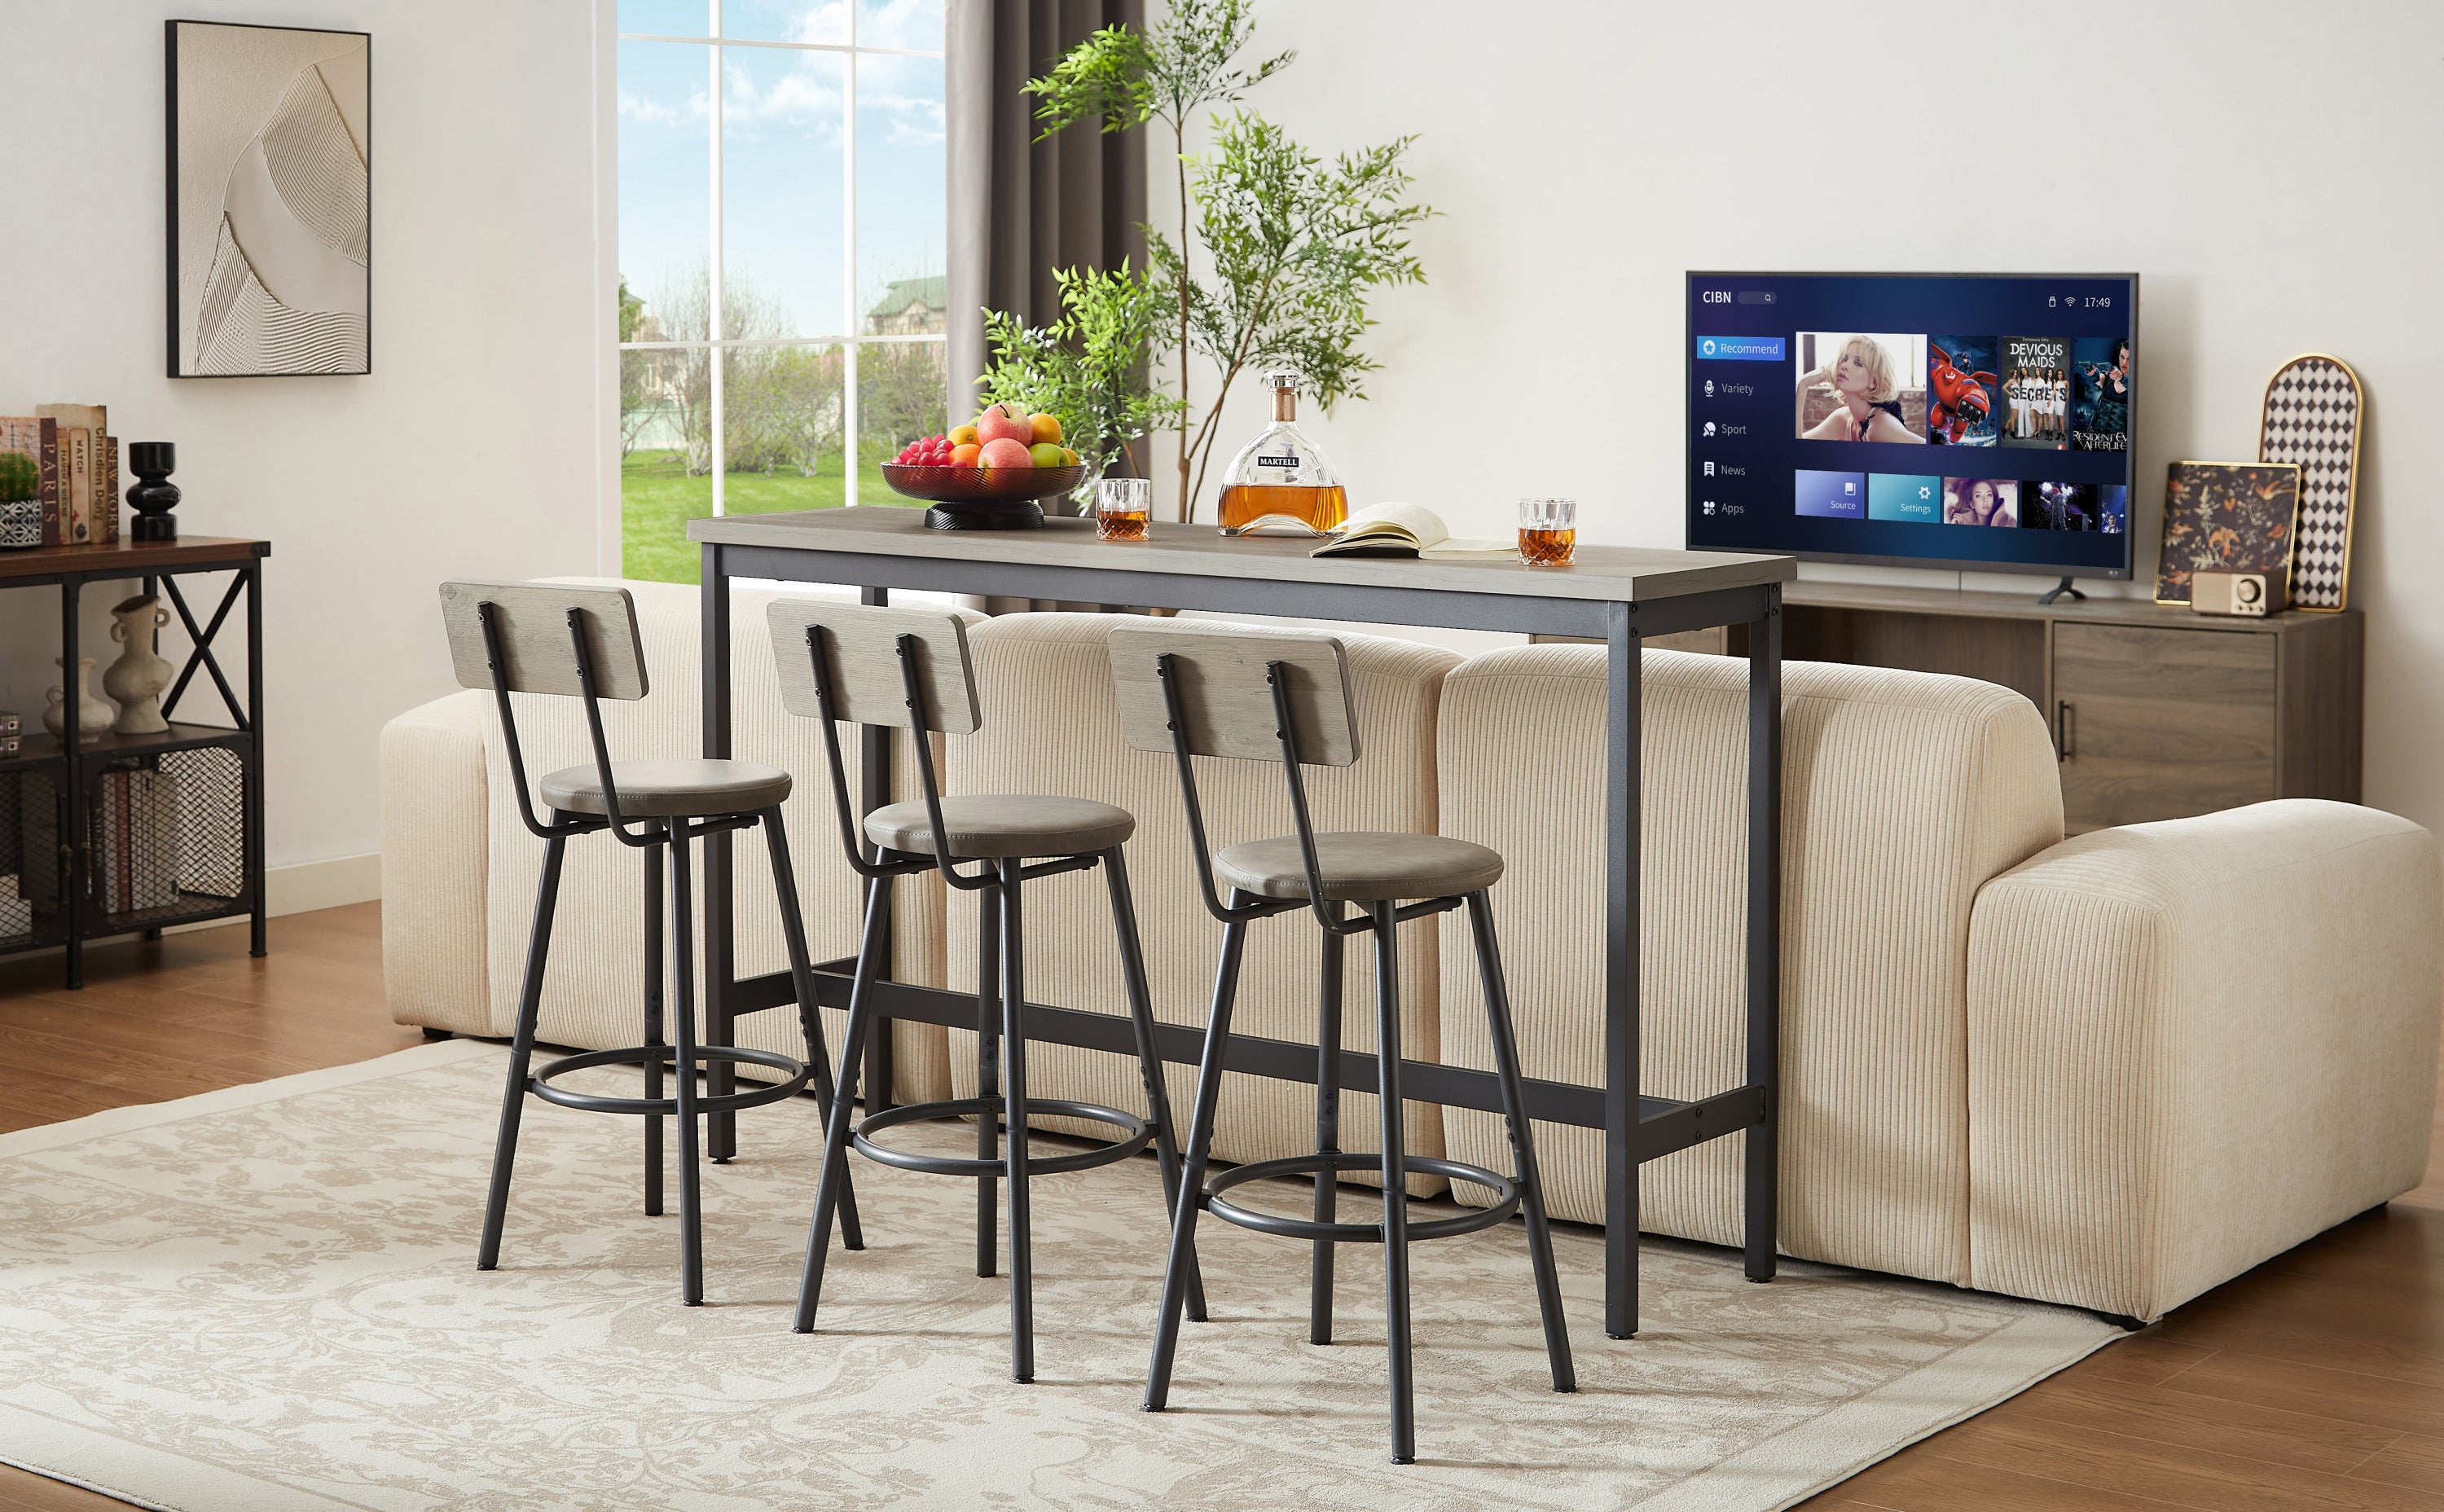 American-style long table and chair combination